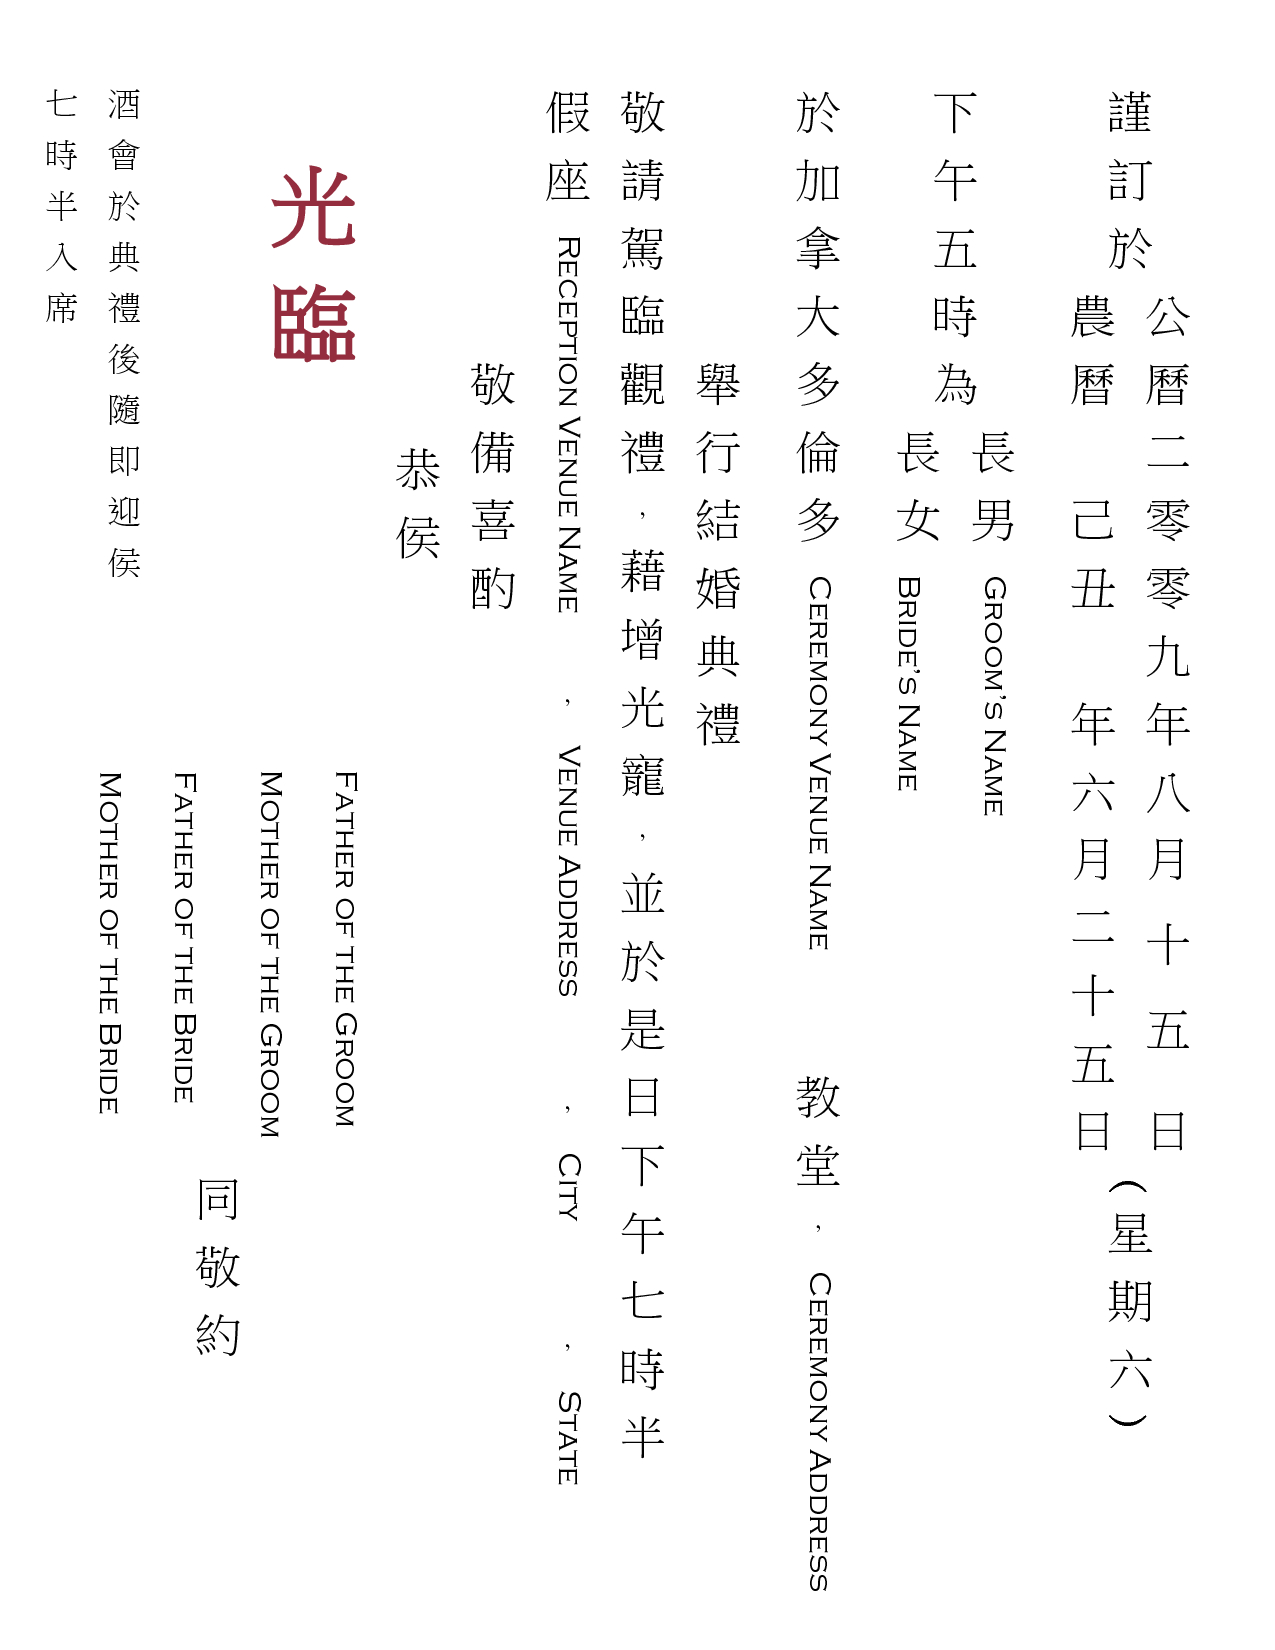 Chinese Invitation Template 1 In 2019 Chinese Wedding throughout sizing 1275 X 1650